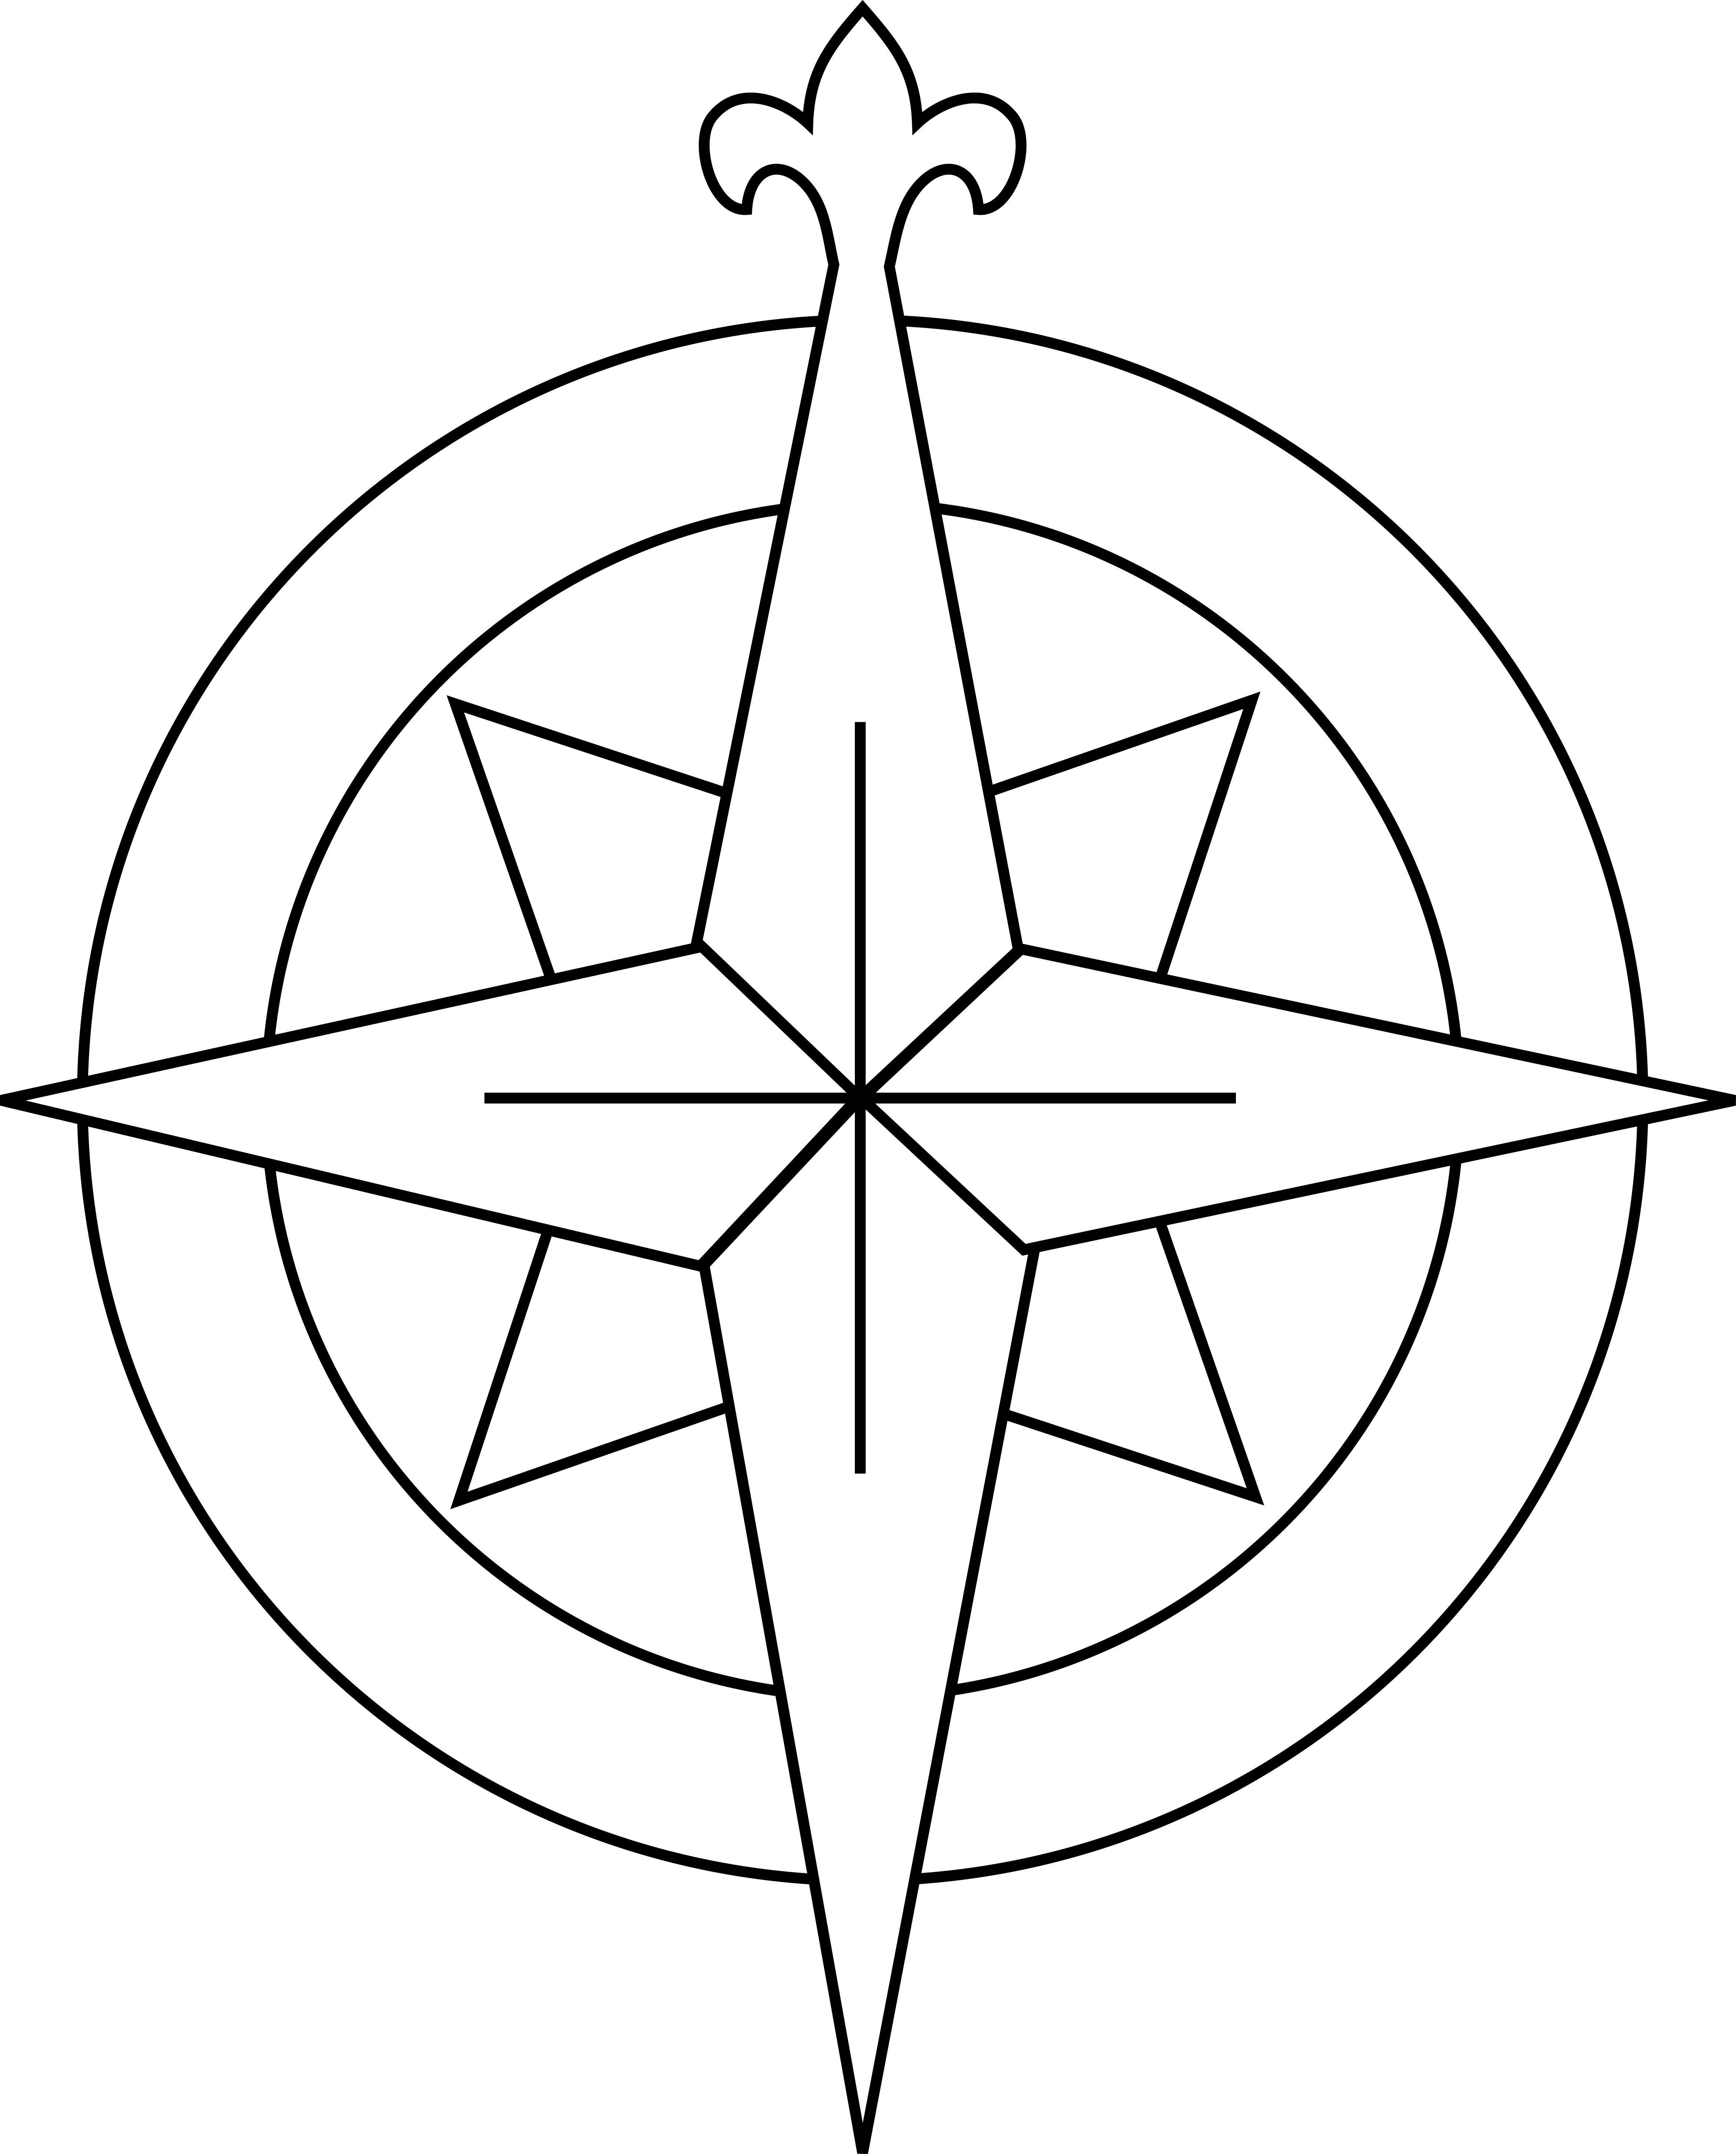 Free Compass Rose Template Download Free Compass Rose Template Png Images Free Cliparts On Clipart Library